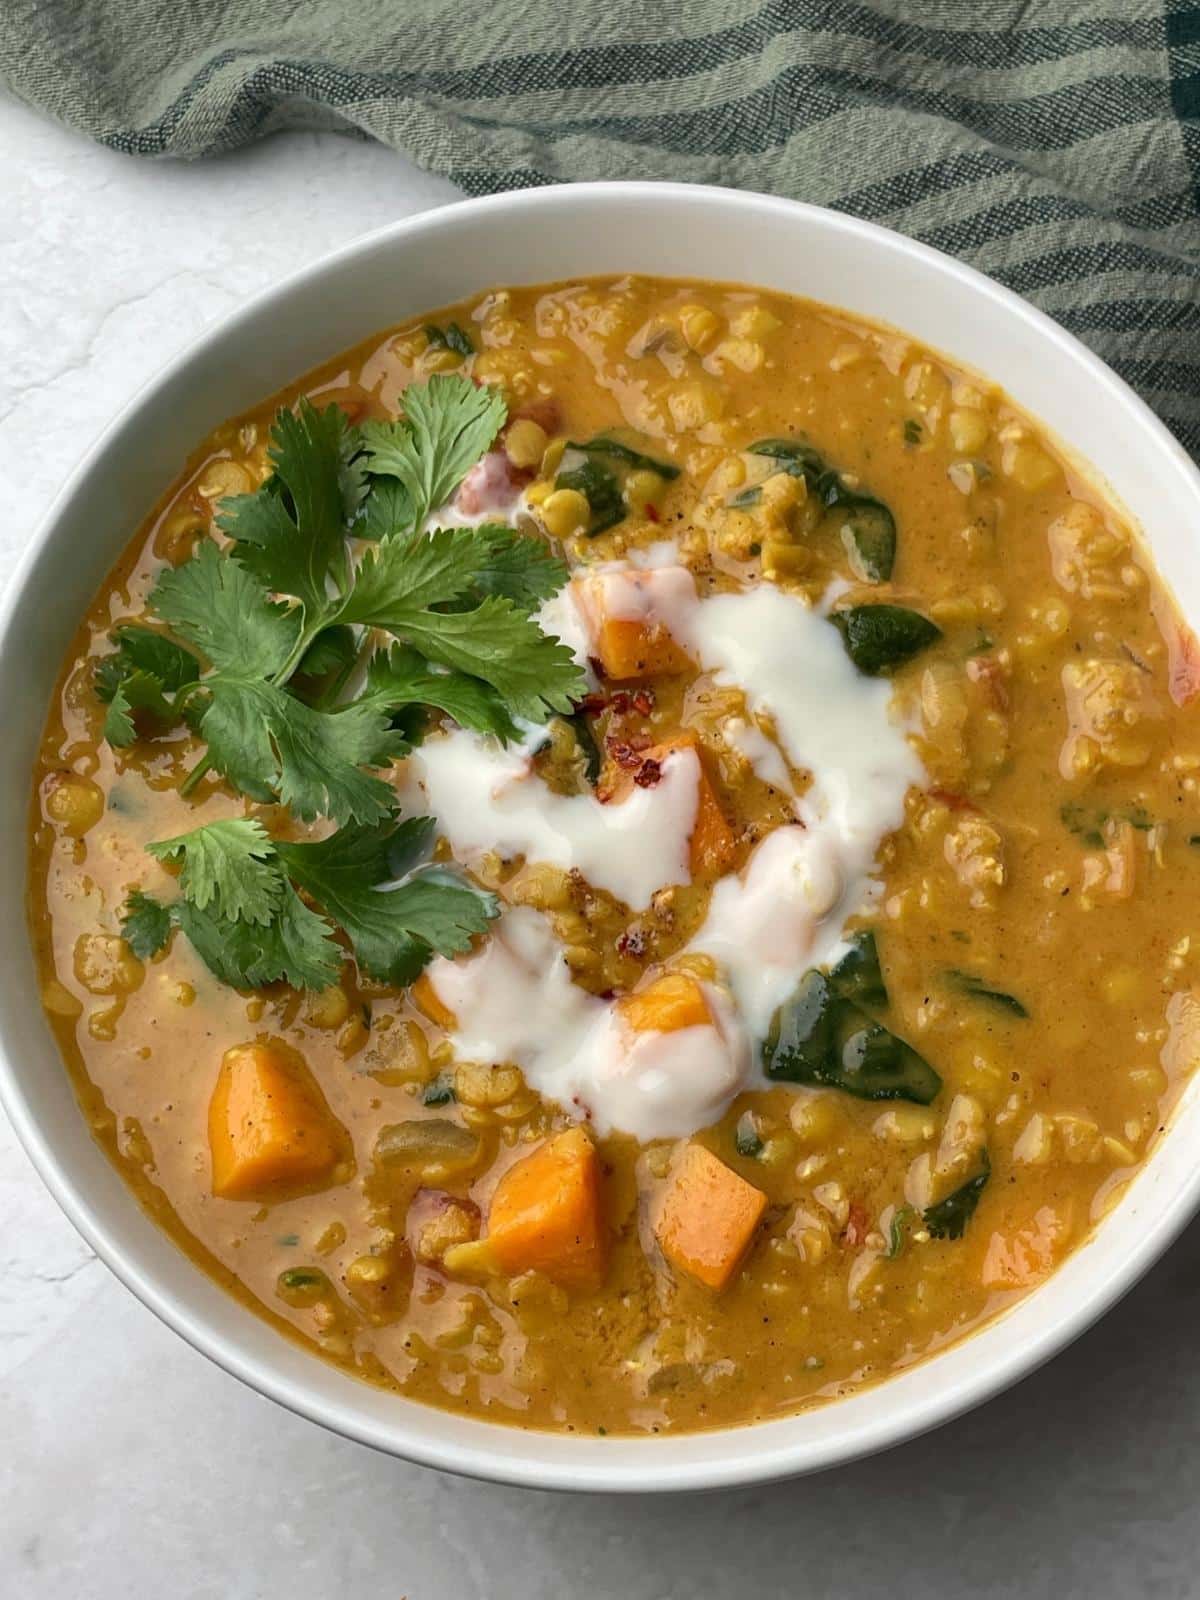 Red curry lentils with sweet potatoes and spinach.